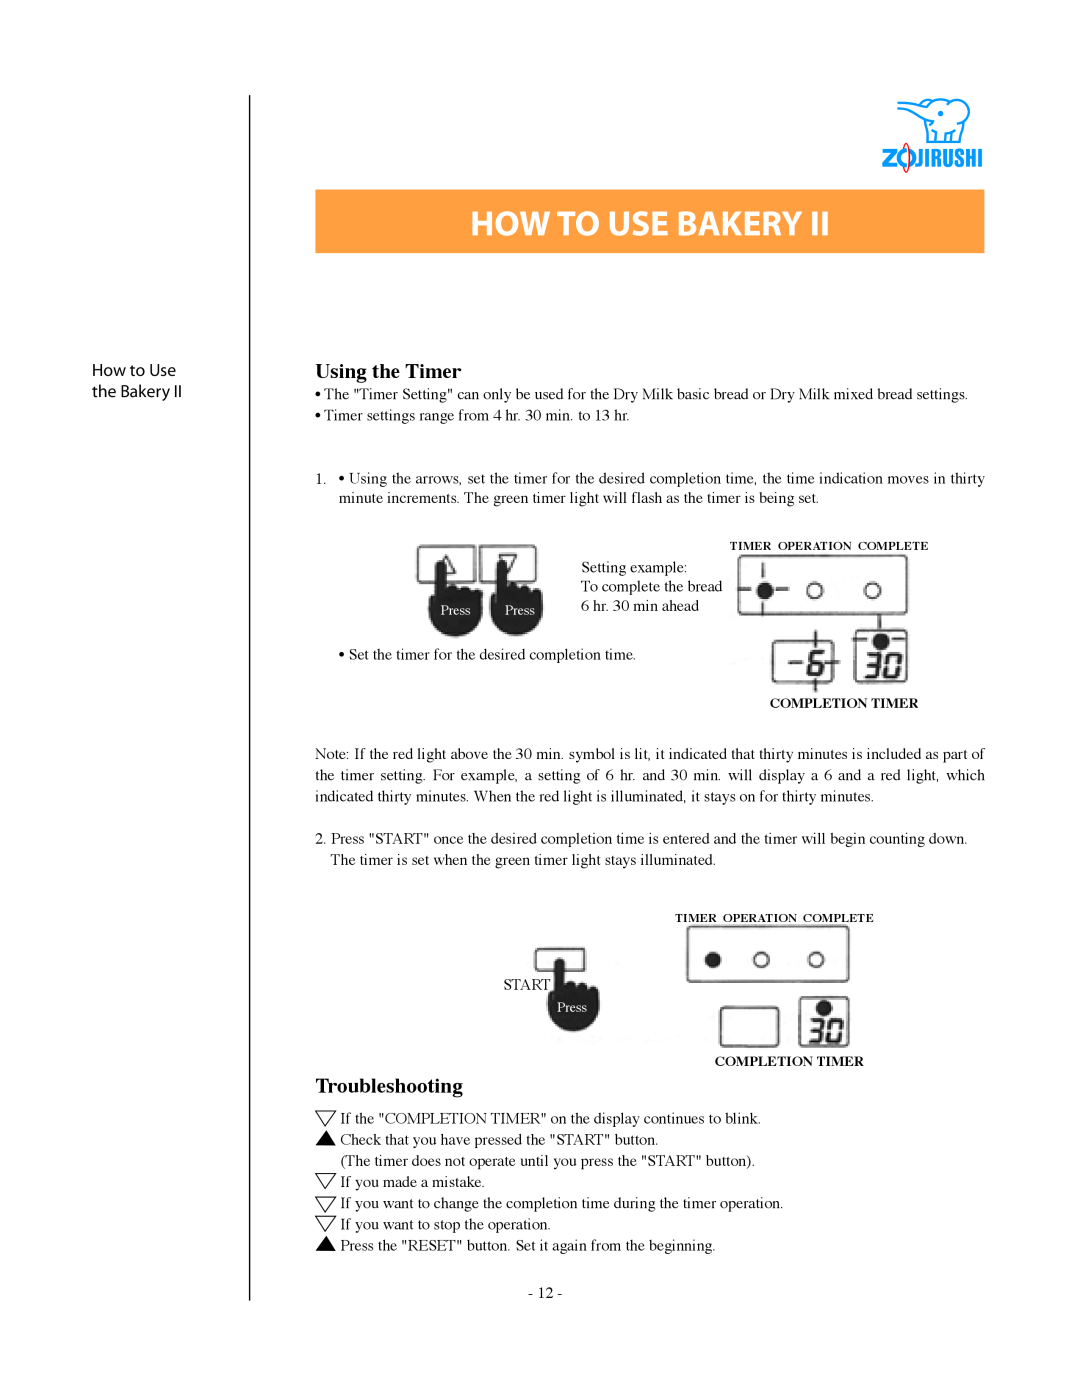 Zojirushi BBCC - M15 Using the Timer, Troubleshooting, How To Use Bakery, How to Use the Bakery, Setting example 